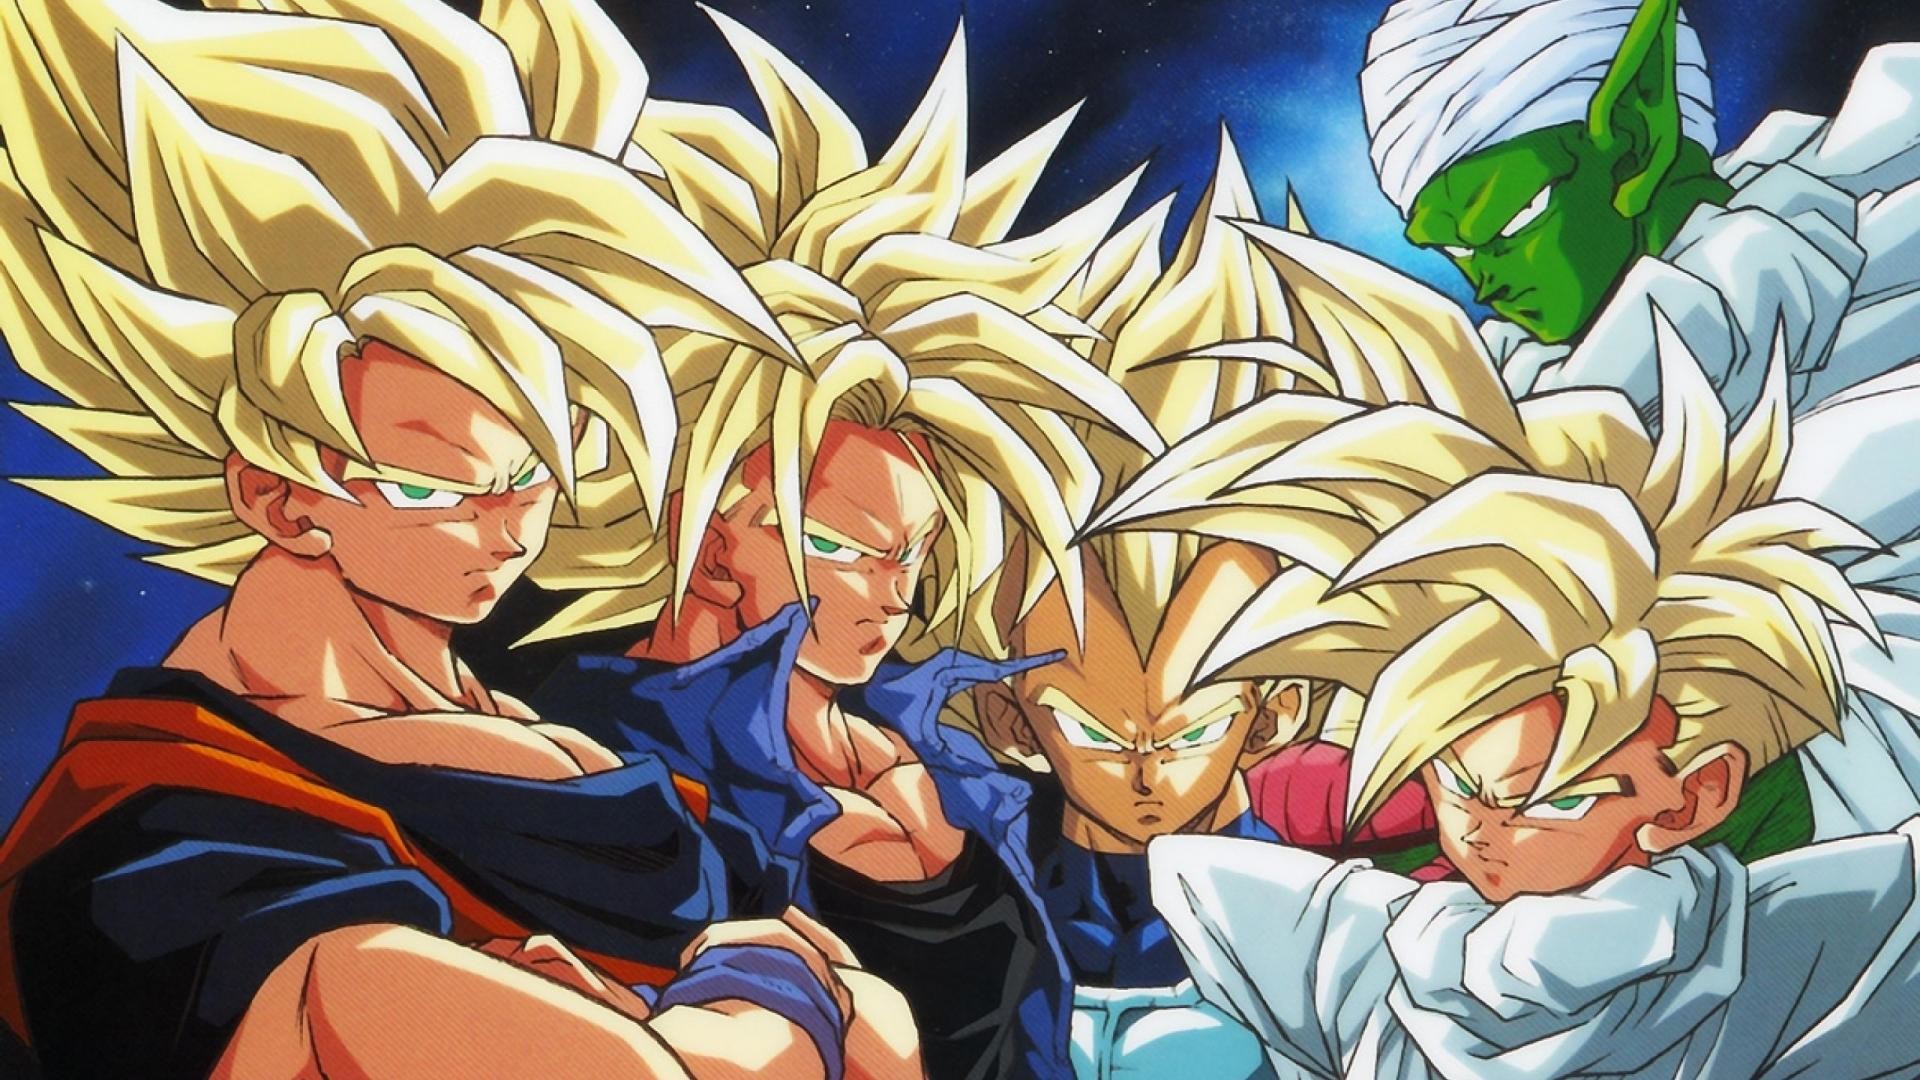 1920x1080 Dragonball fans, get ready for a treat. The team behind Hyper Dragonball Z  has released a new update for it.